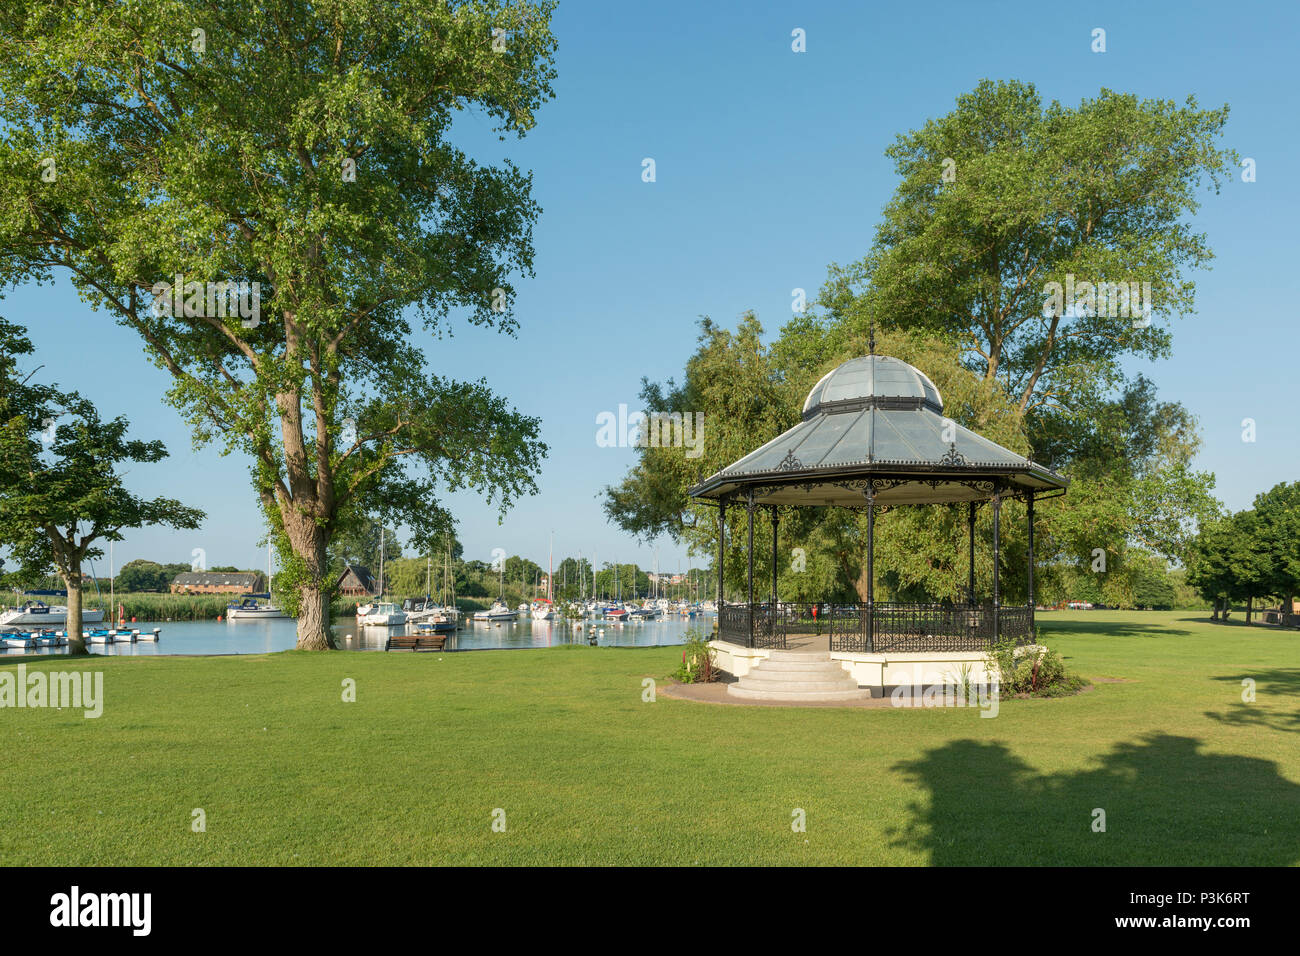 A bandstand in The Quomps area of Christchurch, Dorset, UK. Stock Photo